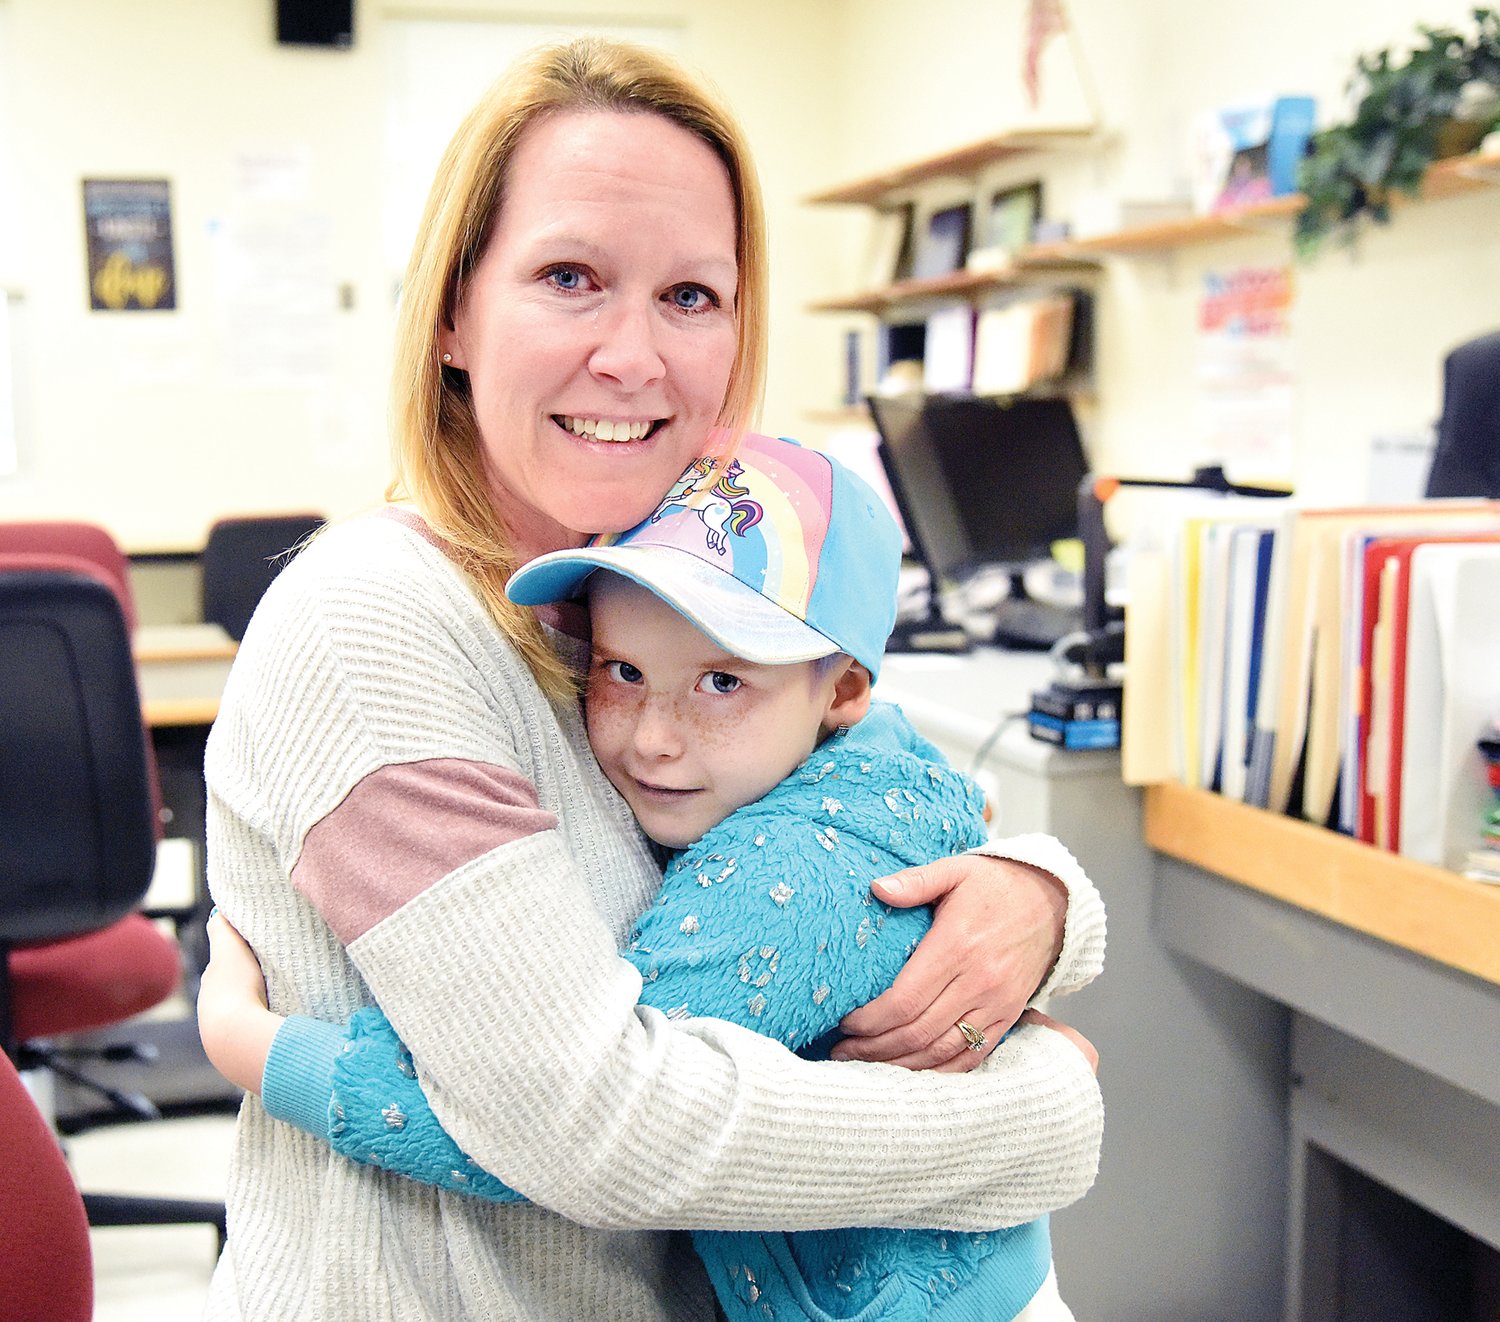 Green Ridge kindergarten teacher Jill Piscopo cries tears of joy at a surprise visit Tuesday by her student Chevi Meyers, 5, who has stage four cancer. Chevi hasn’t been able to attend school due to her illness and its treatment. A fundraiser is planned for Chevi on April 23.